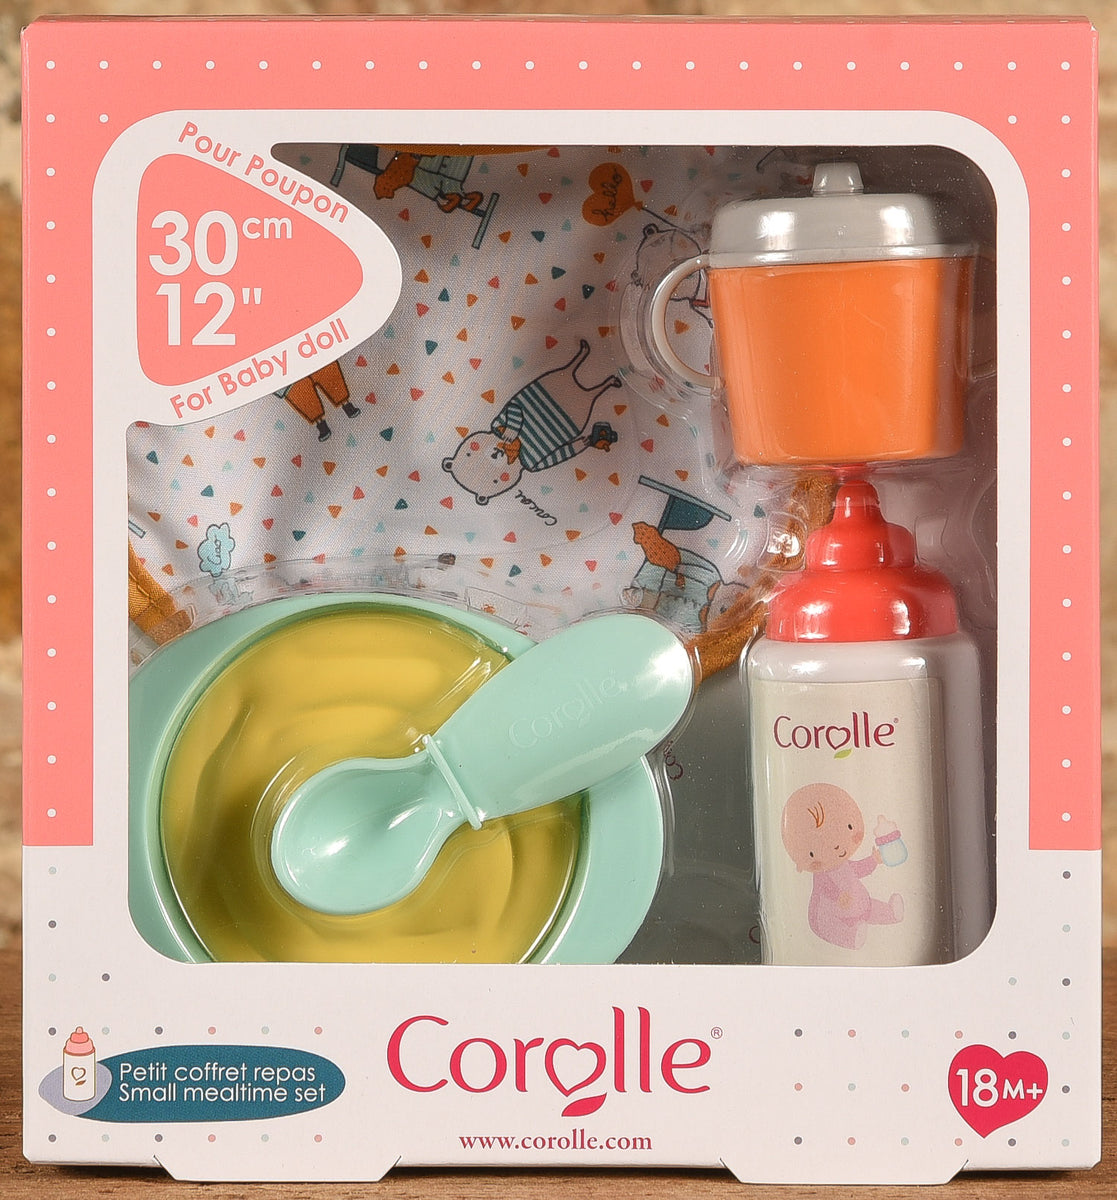 Corolle Mon Premier Poupon Mealtime Set - 5-Piece Accessory Set Includes  Feeding Bottle Cup Bib Feeding Dish & Spoon fits 12'' Baby Dolls for Kids  Ages 18 Months & up Blue Orange Yellow